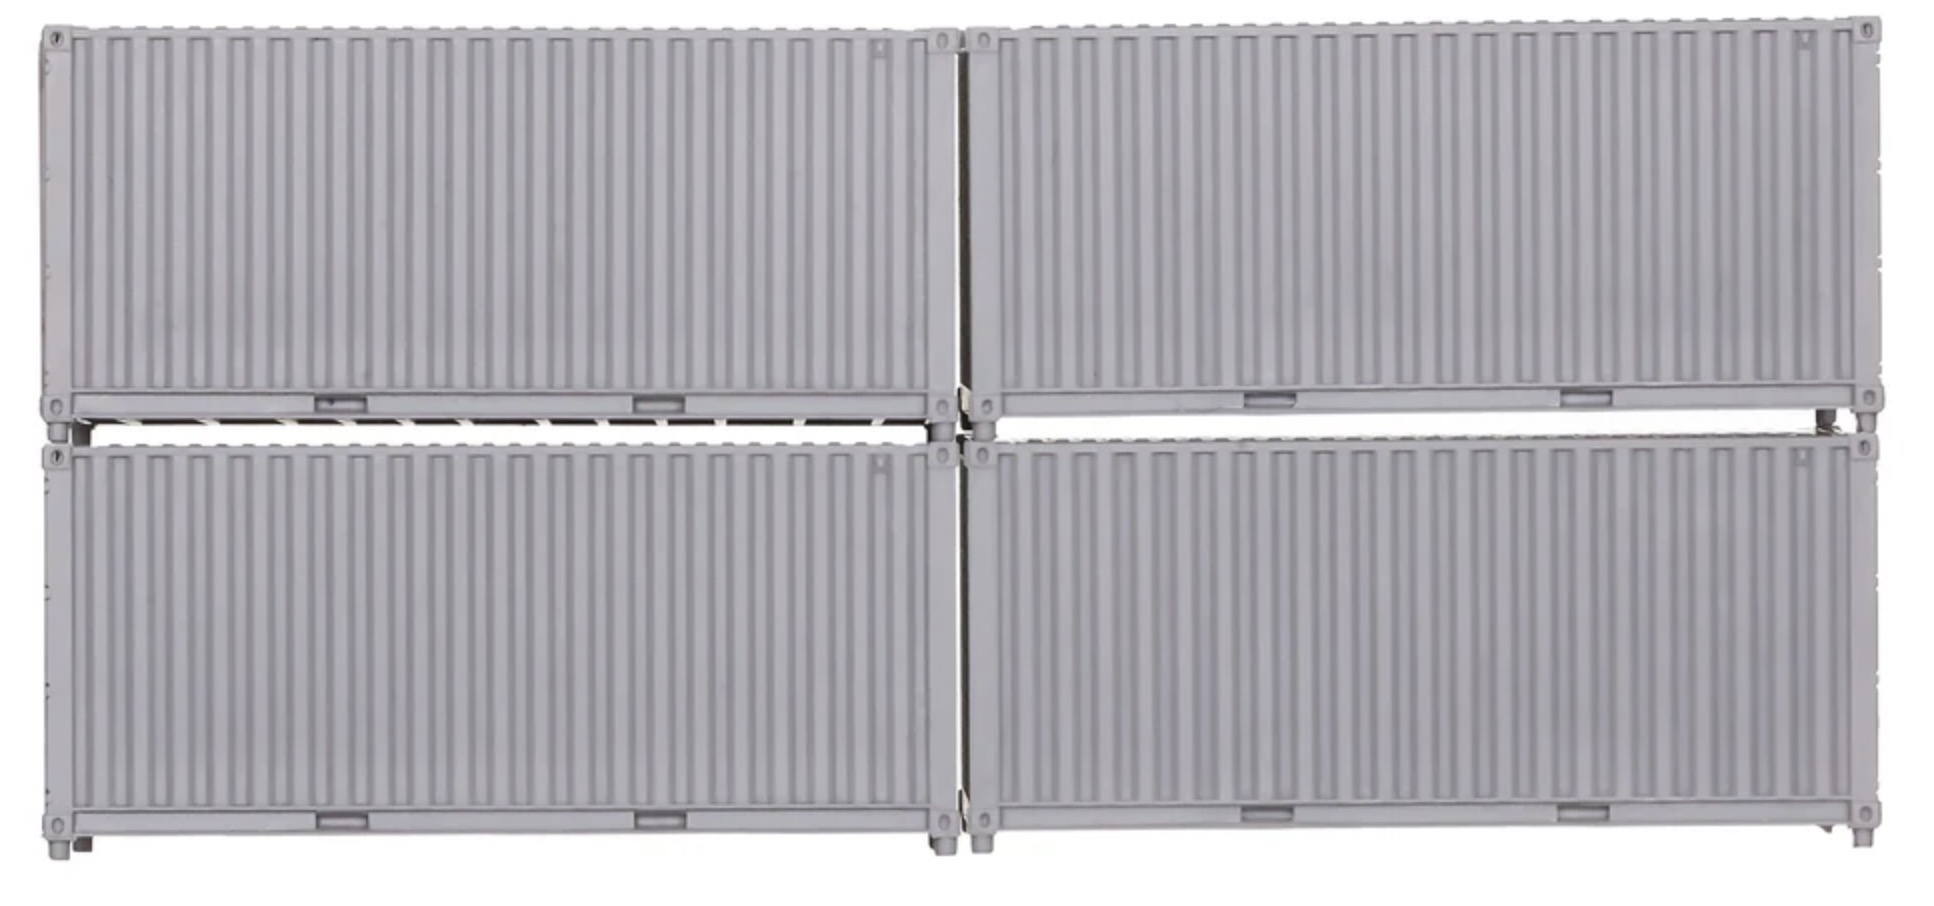 N Scale - Dapol - 2A-000-035 - Container, 20 Foot, Corrugated - Undecorated - 4-Pack